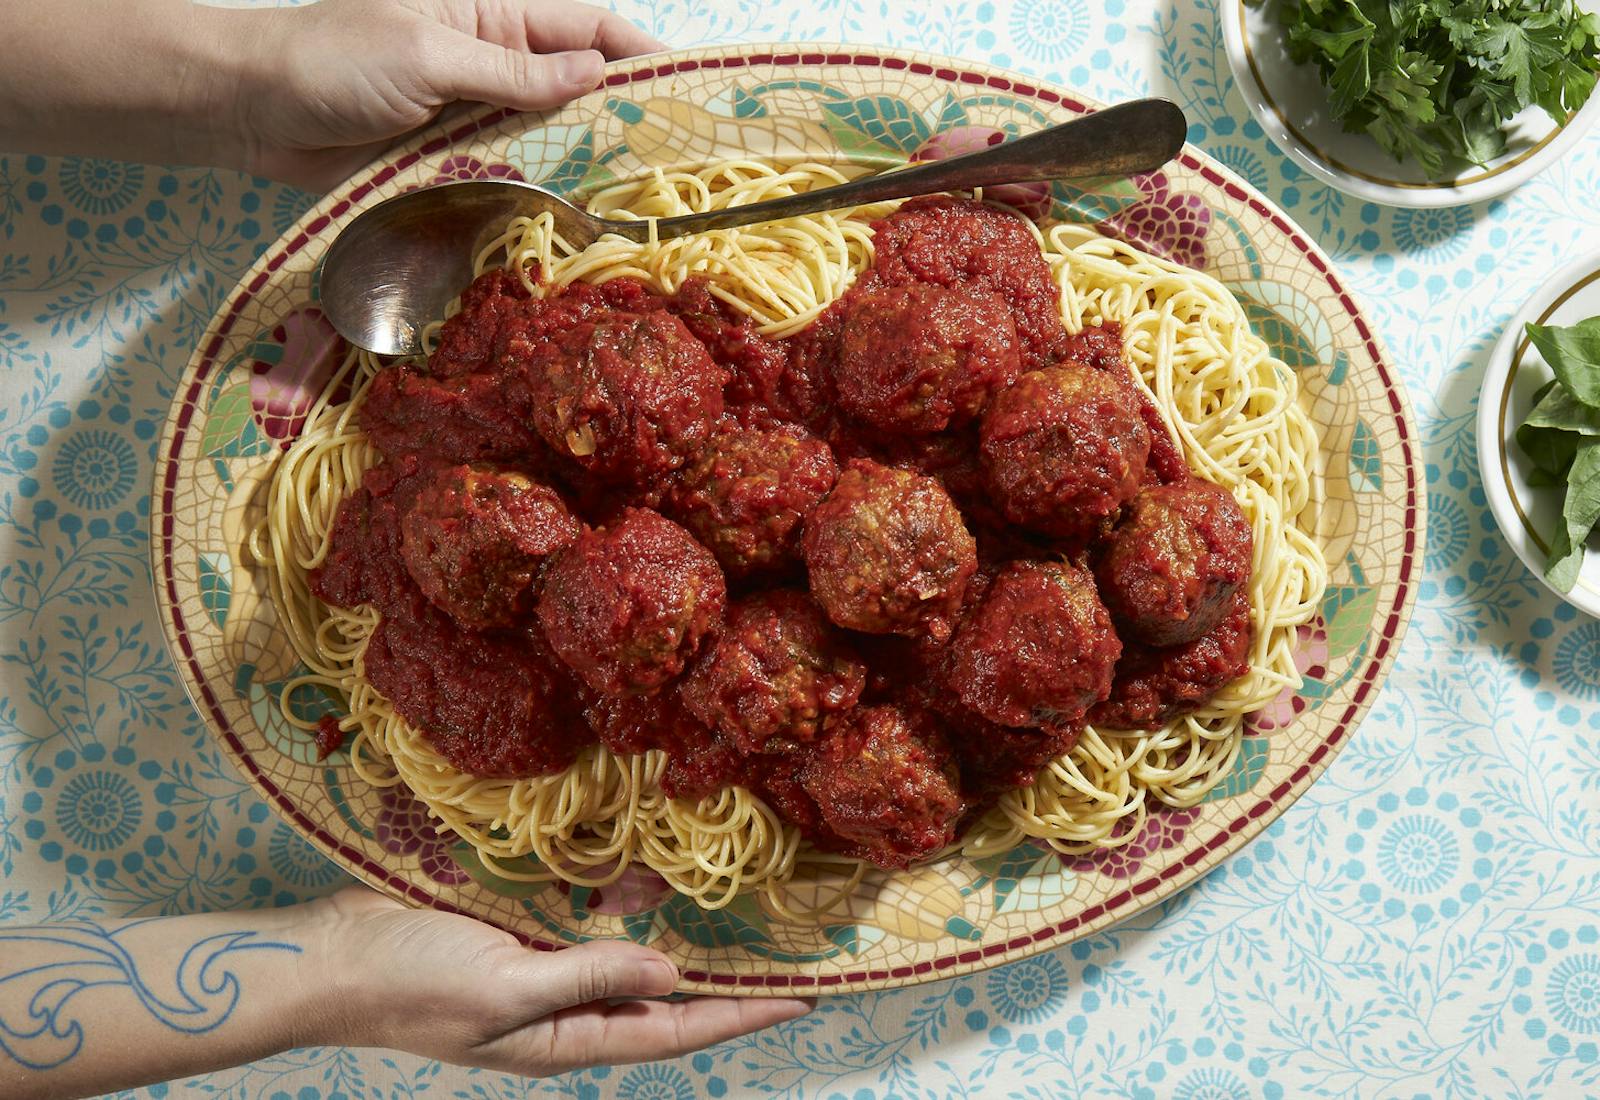 Meatballs with red sauce on bed of spaghetti, bowls with parsley and basil atop blue tablecloth.